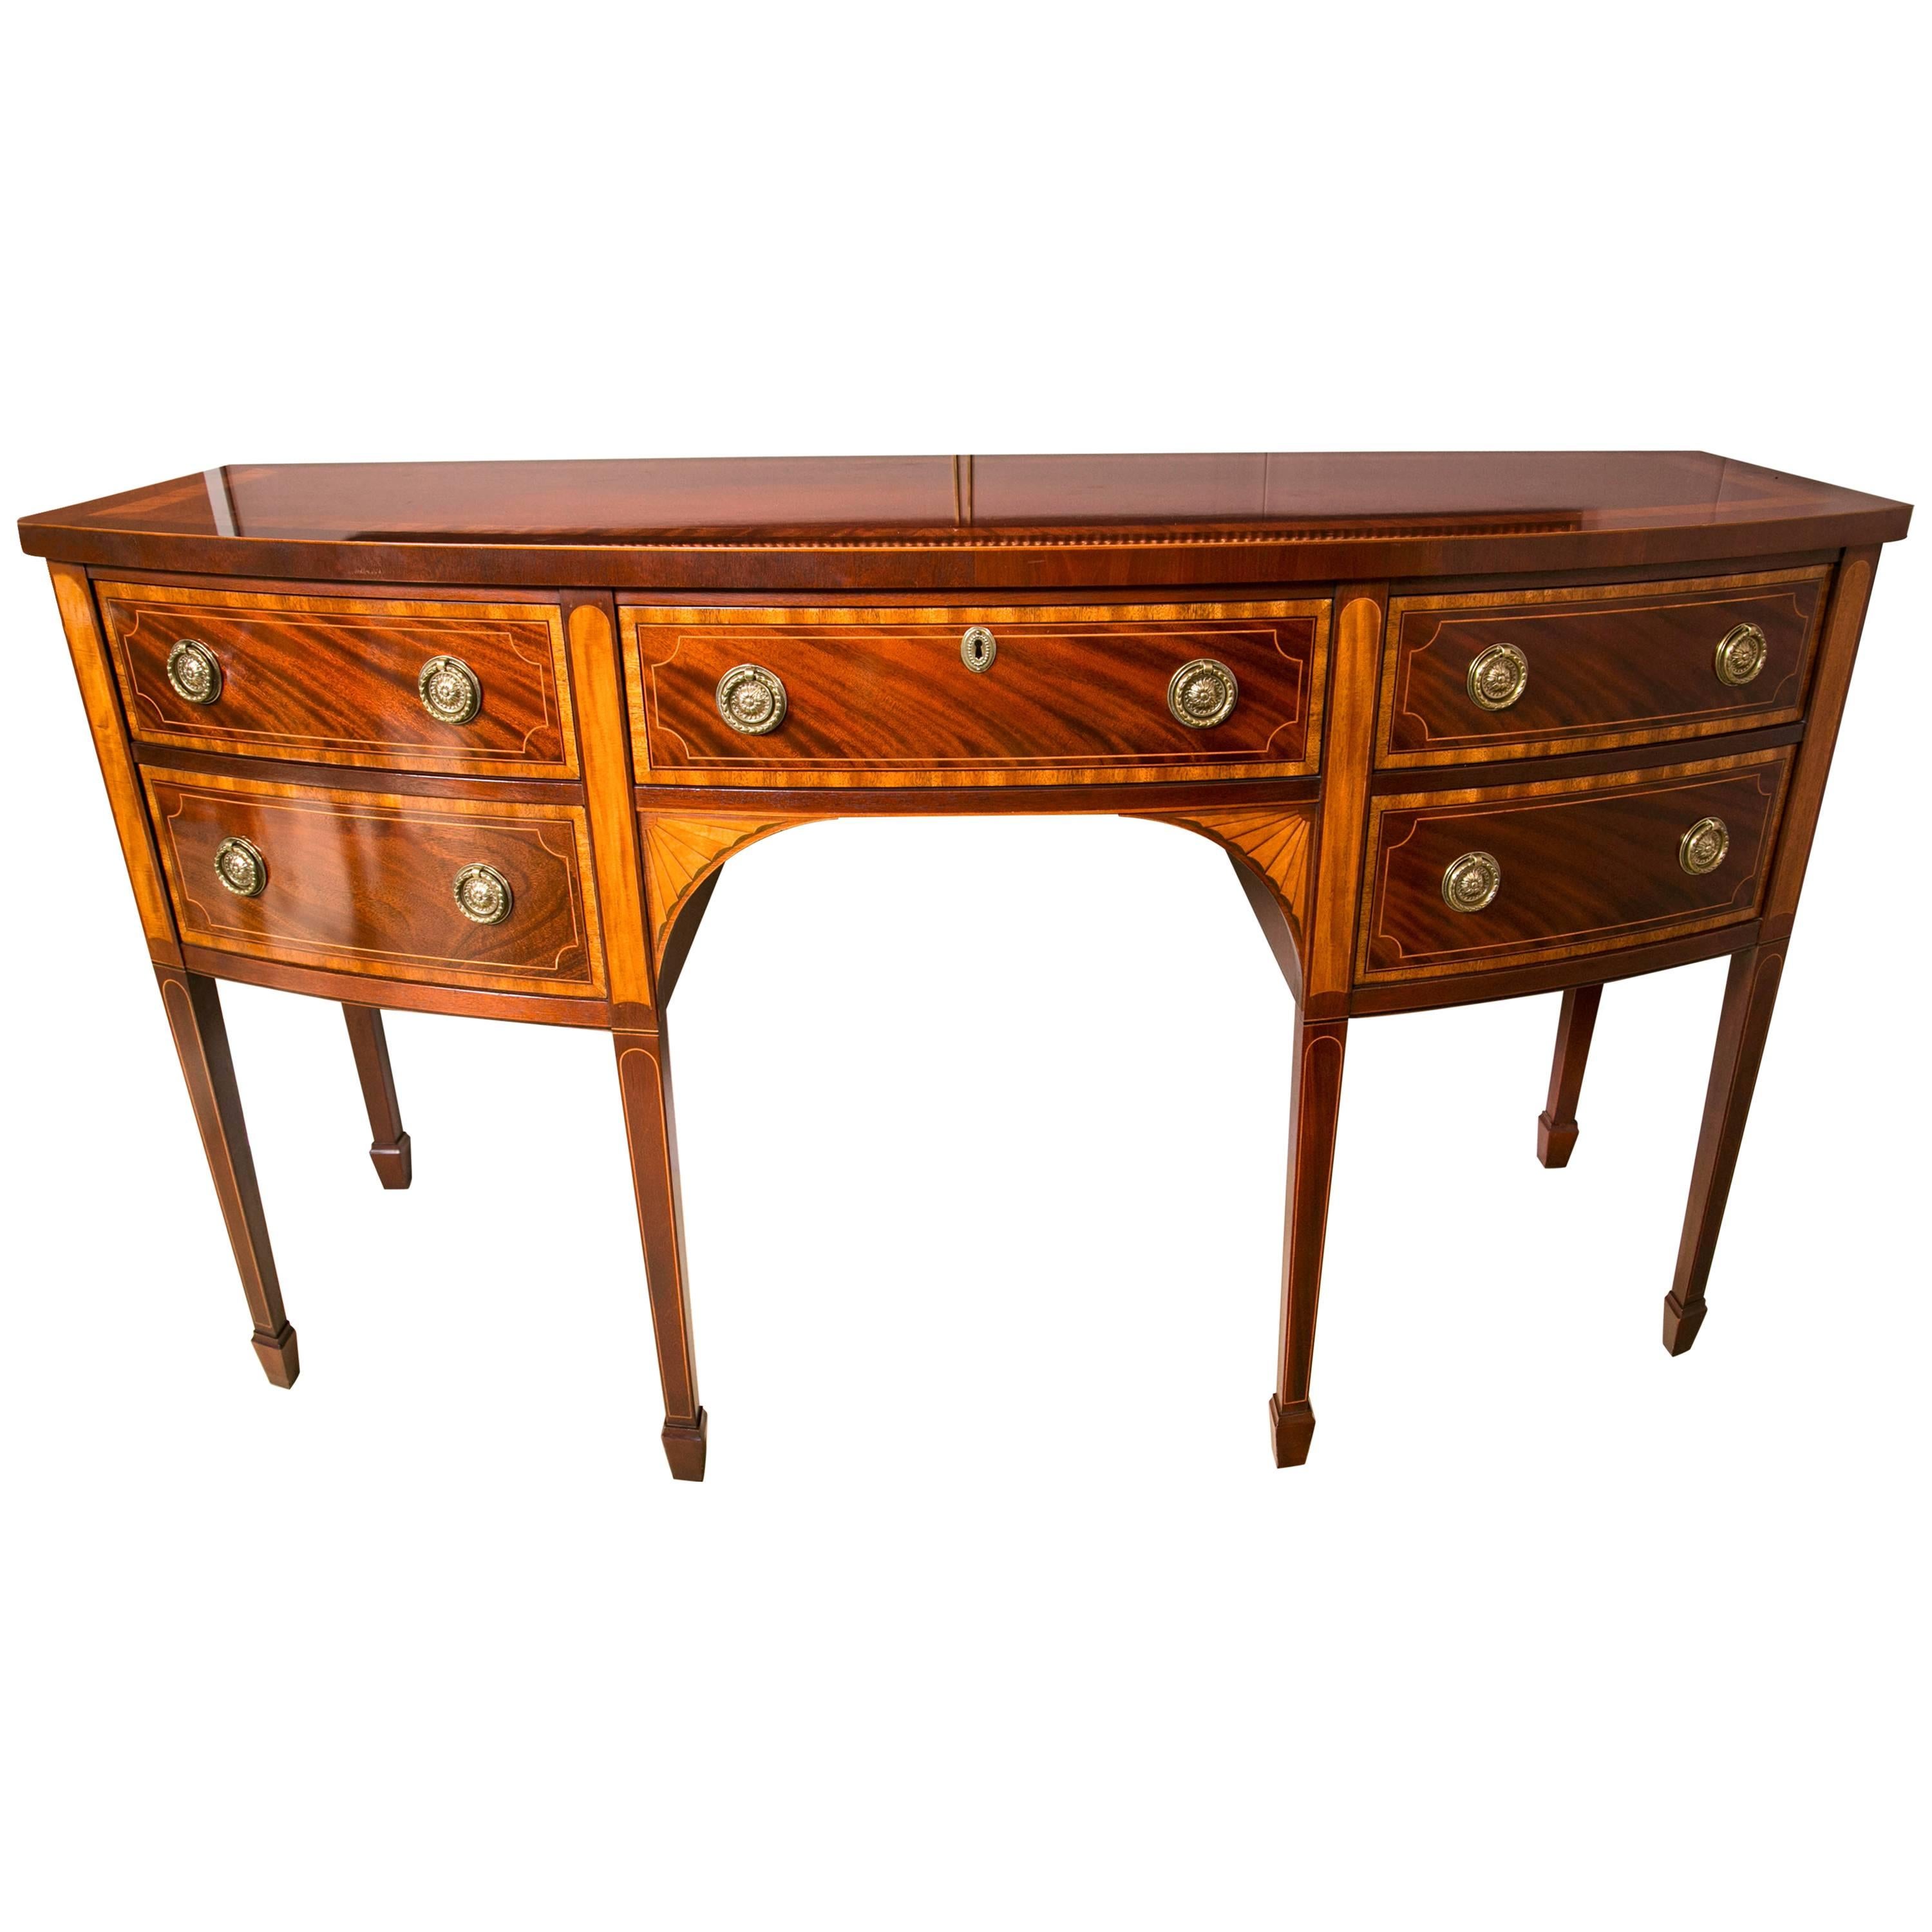 Mahogany and Satinwood Inlaid Bowfront Sideboard by Baker Historic Collection